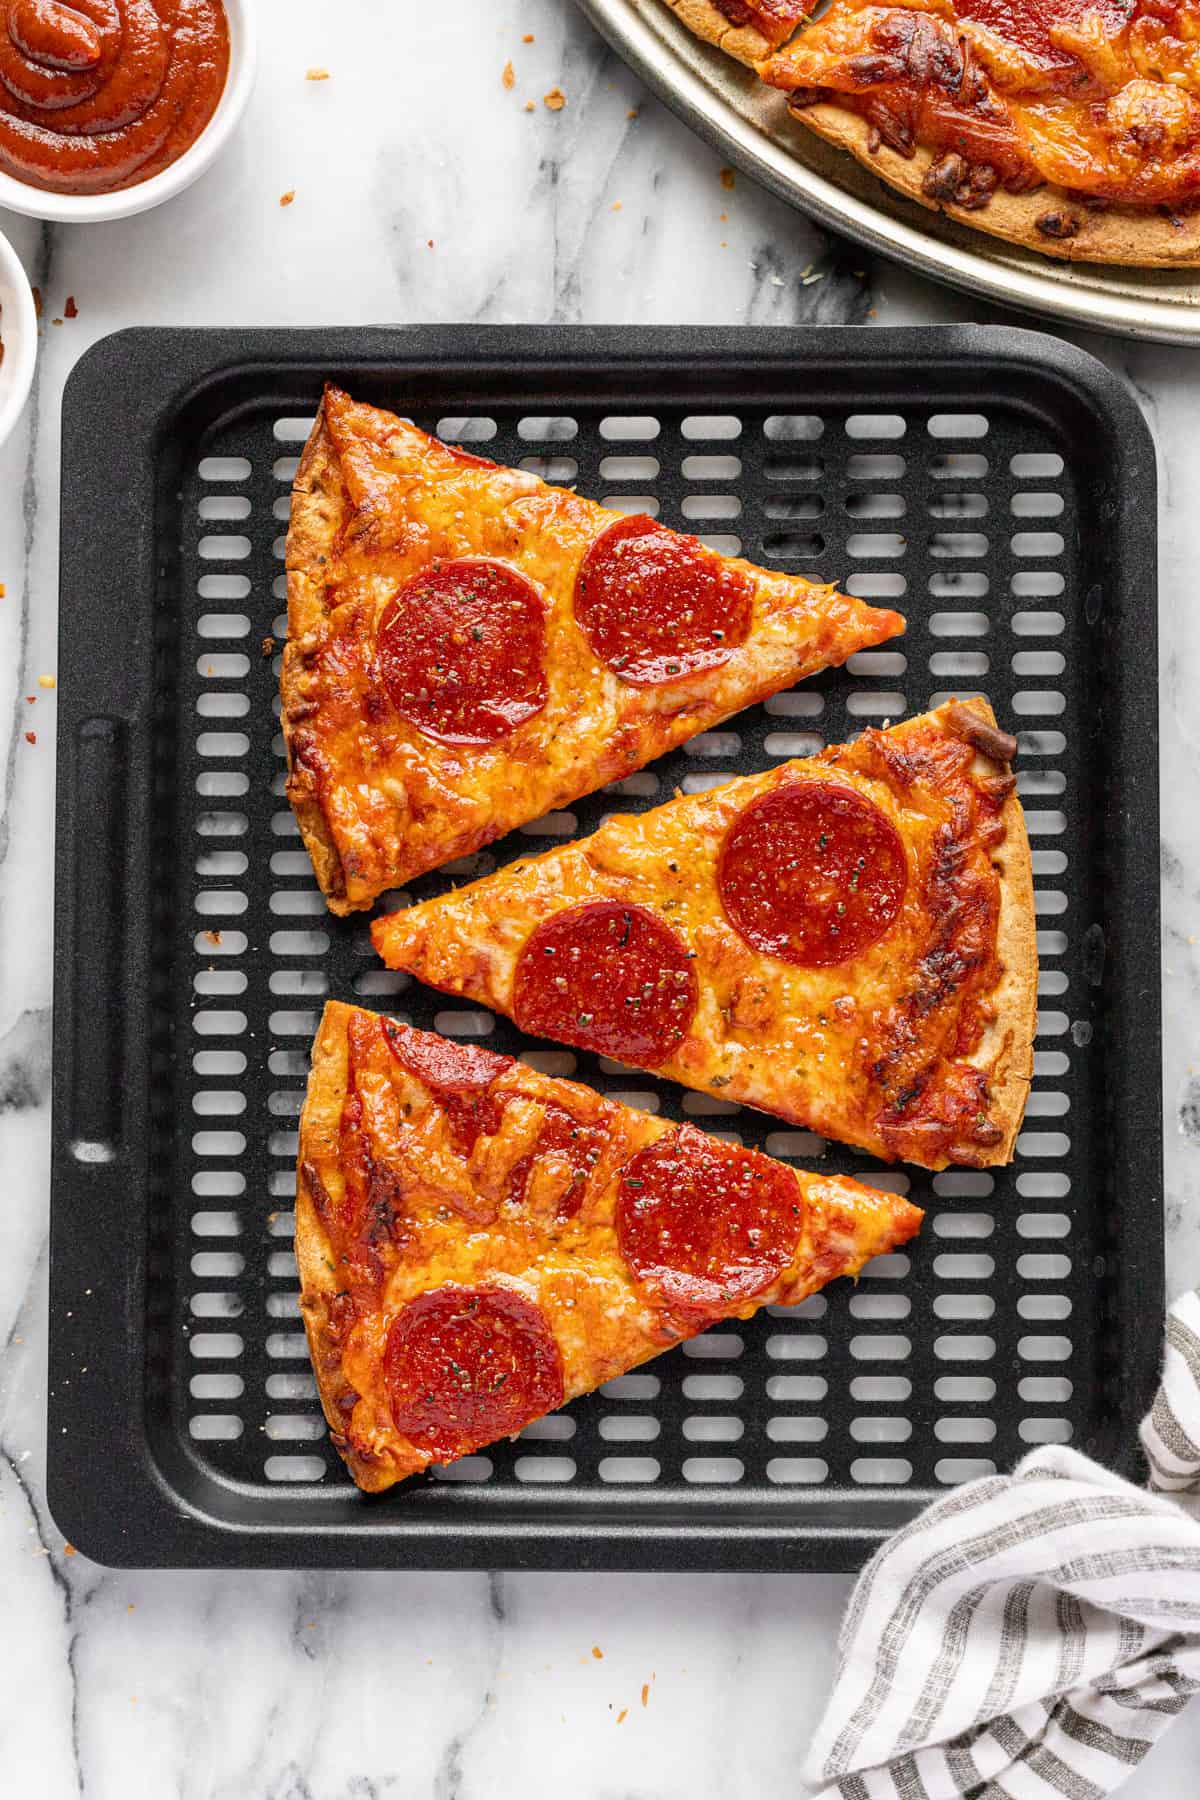 Black air fryer tray with slices of pepperoni pizza on it.